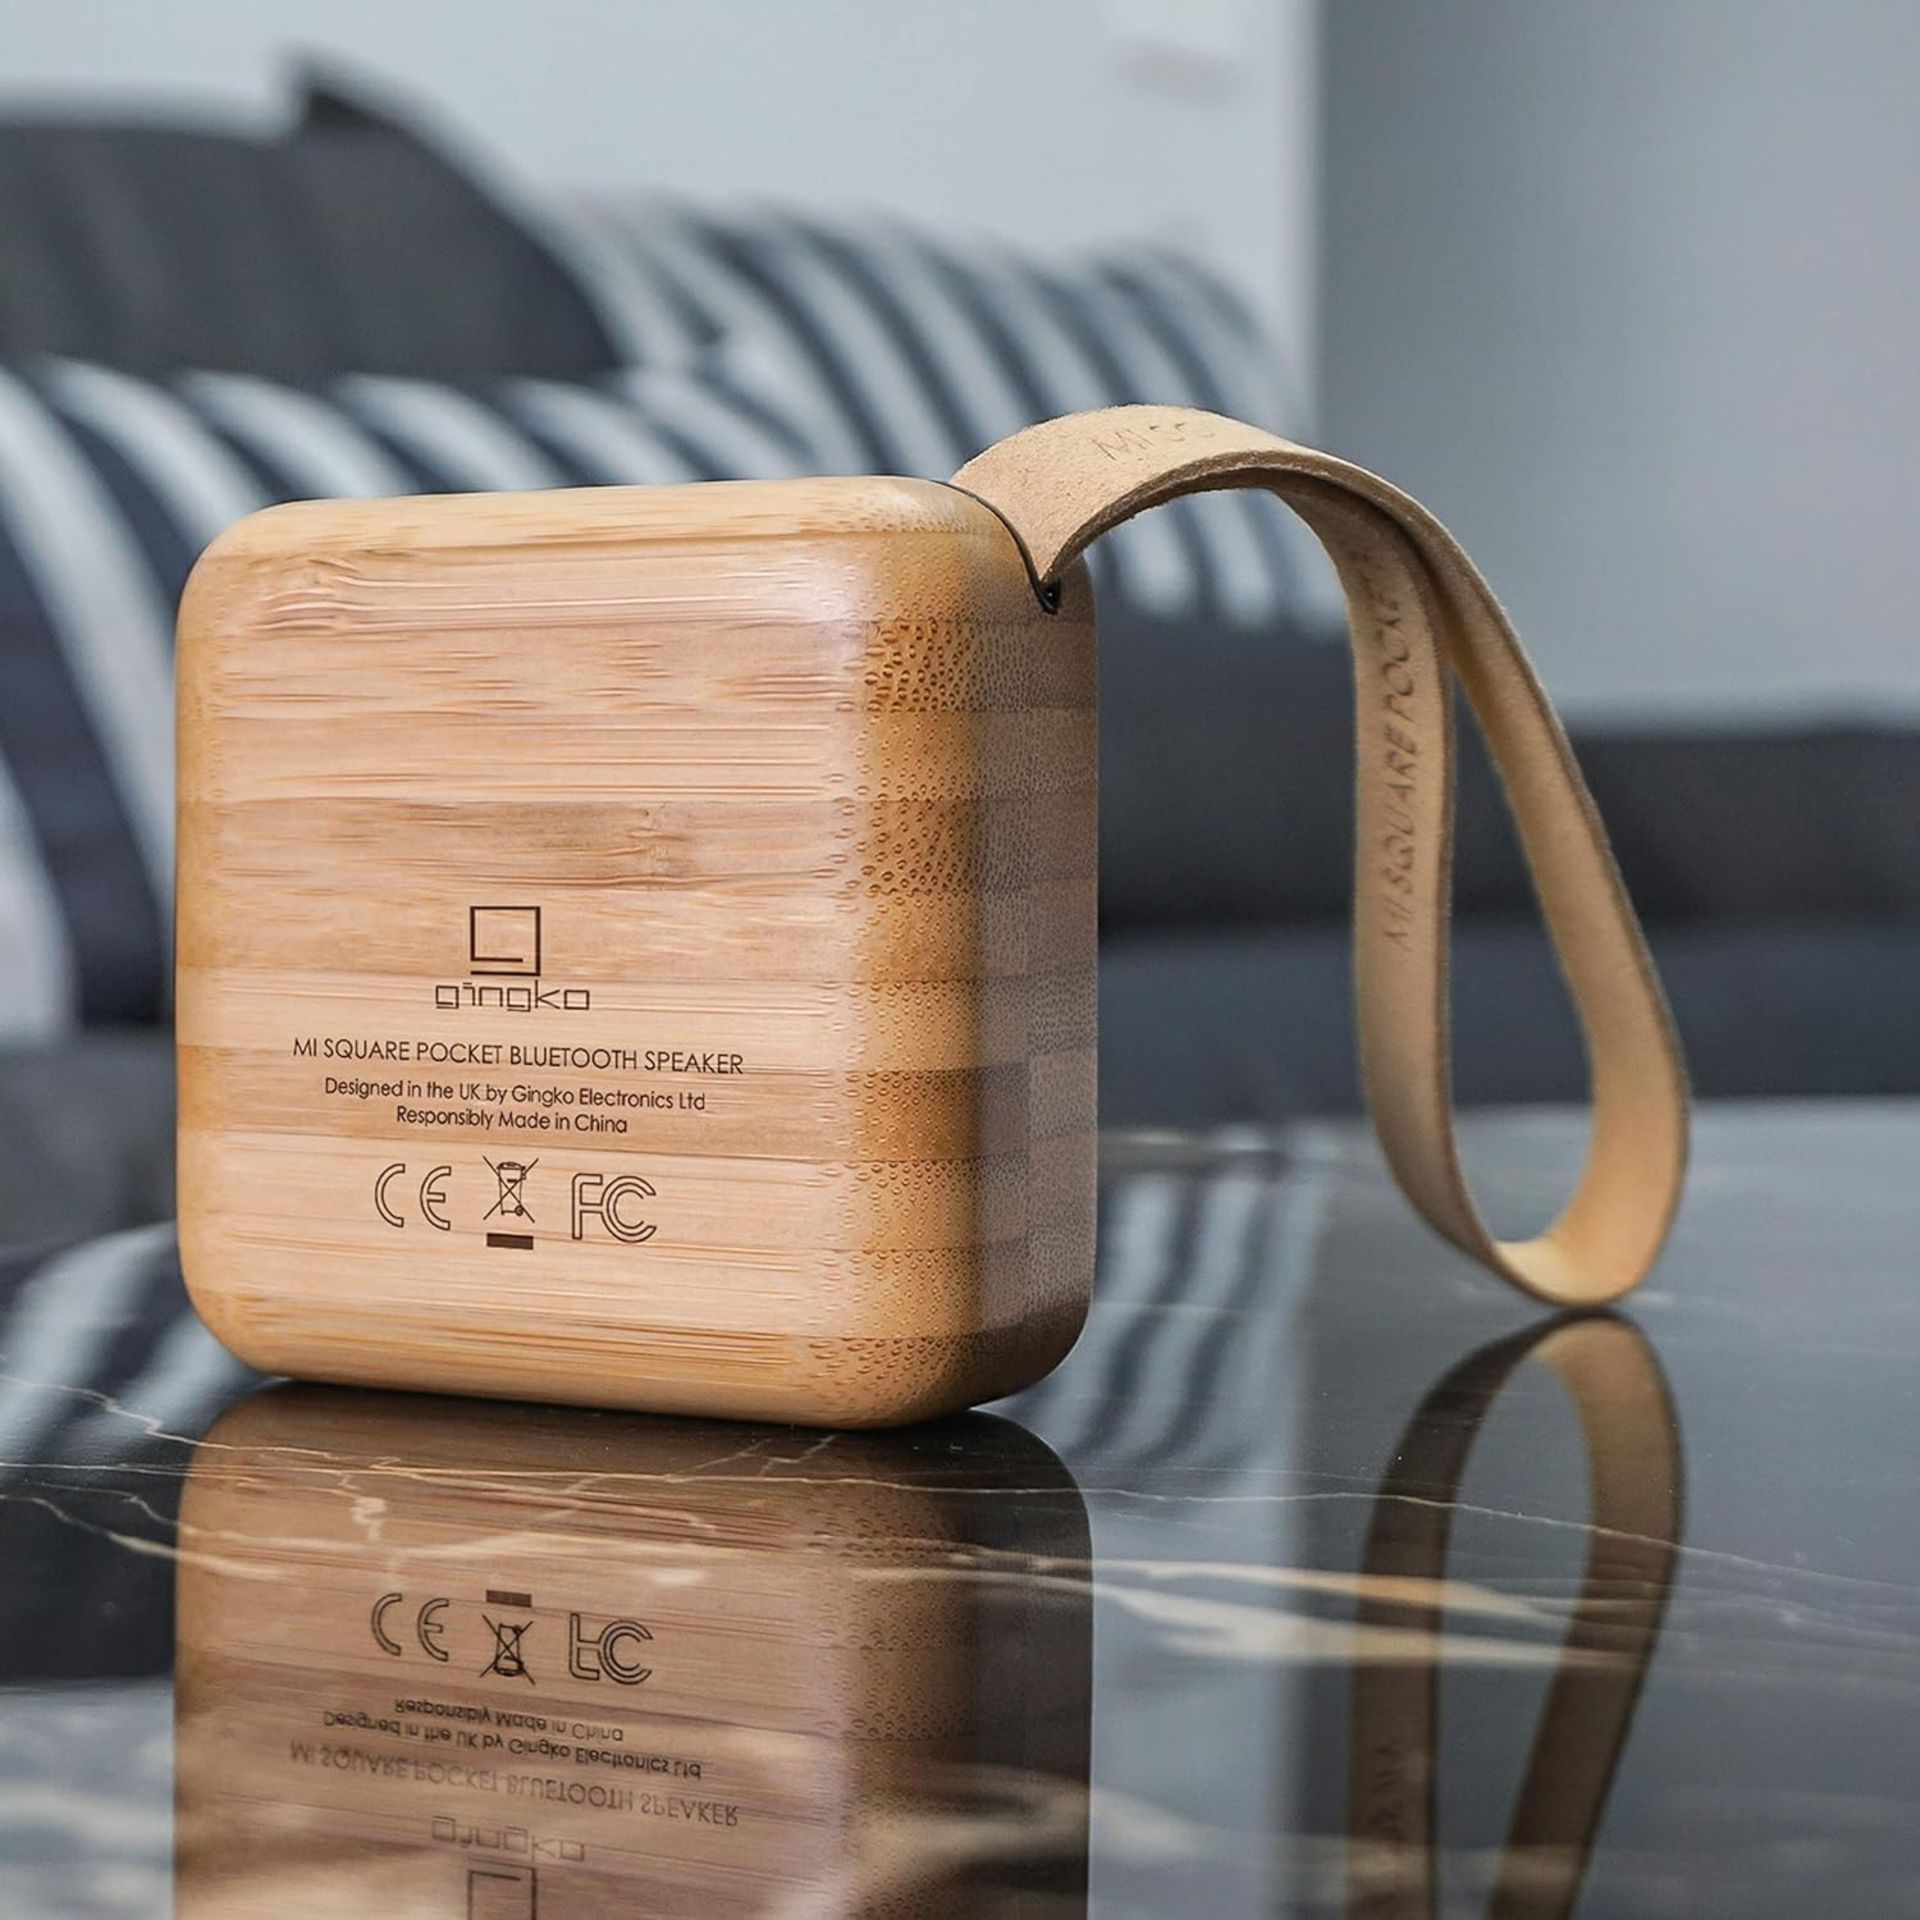 15 X NEW GINGKO MI SQUARE POCKET SOLID WOOD PORTABLE BLUETOOTH SPEAKER RECHARGEABLE BATTERY - Image 2 of 5